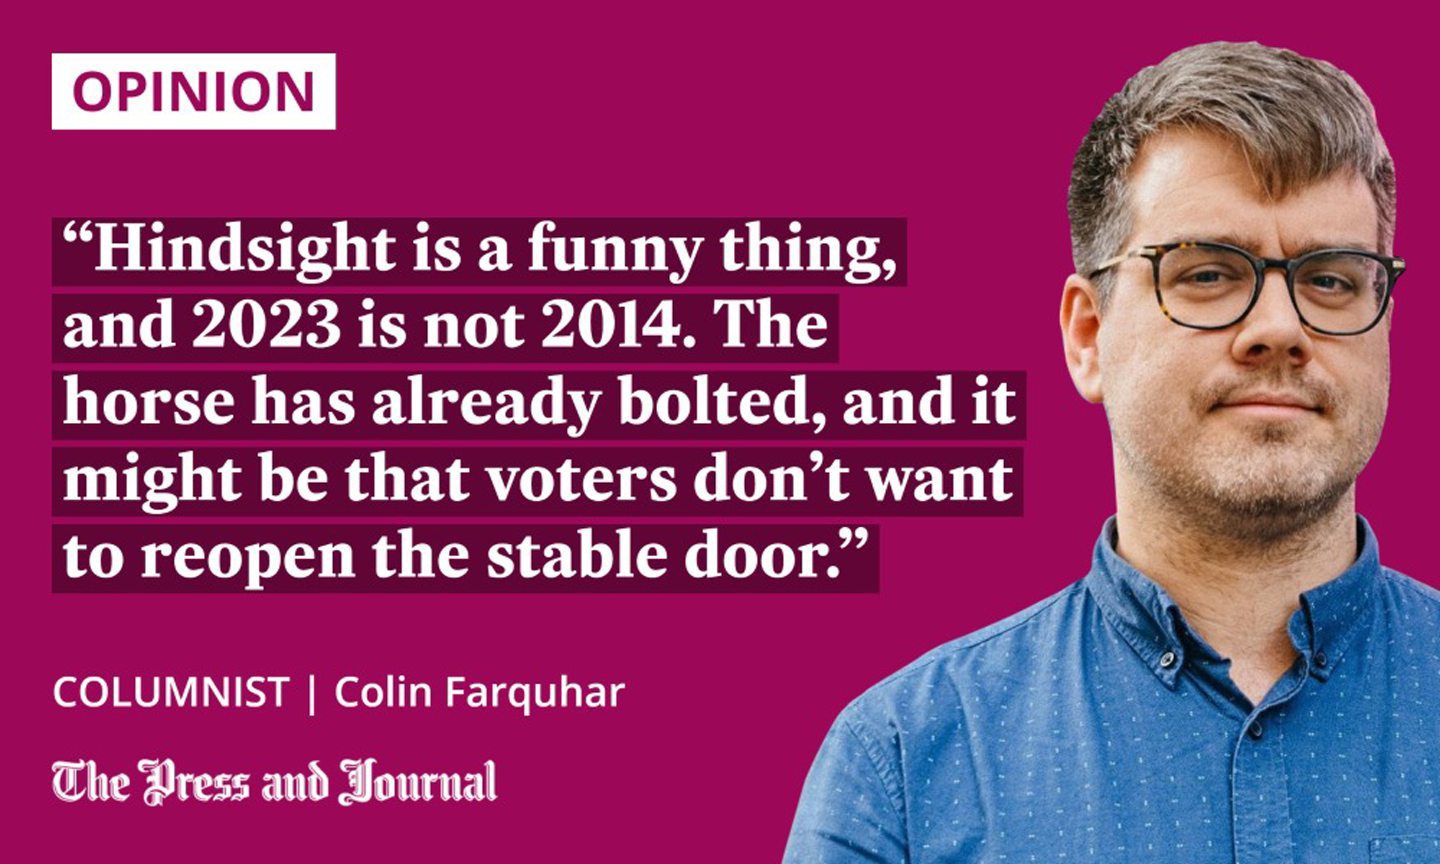 Columnist, Colin Farquhar, speaks up about Scottish independence: "Hindsight is a funny thing, and 2023 is not 2014. The horse has already bolted, and it might be that voters don’t want to reopen the stable door."